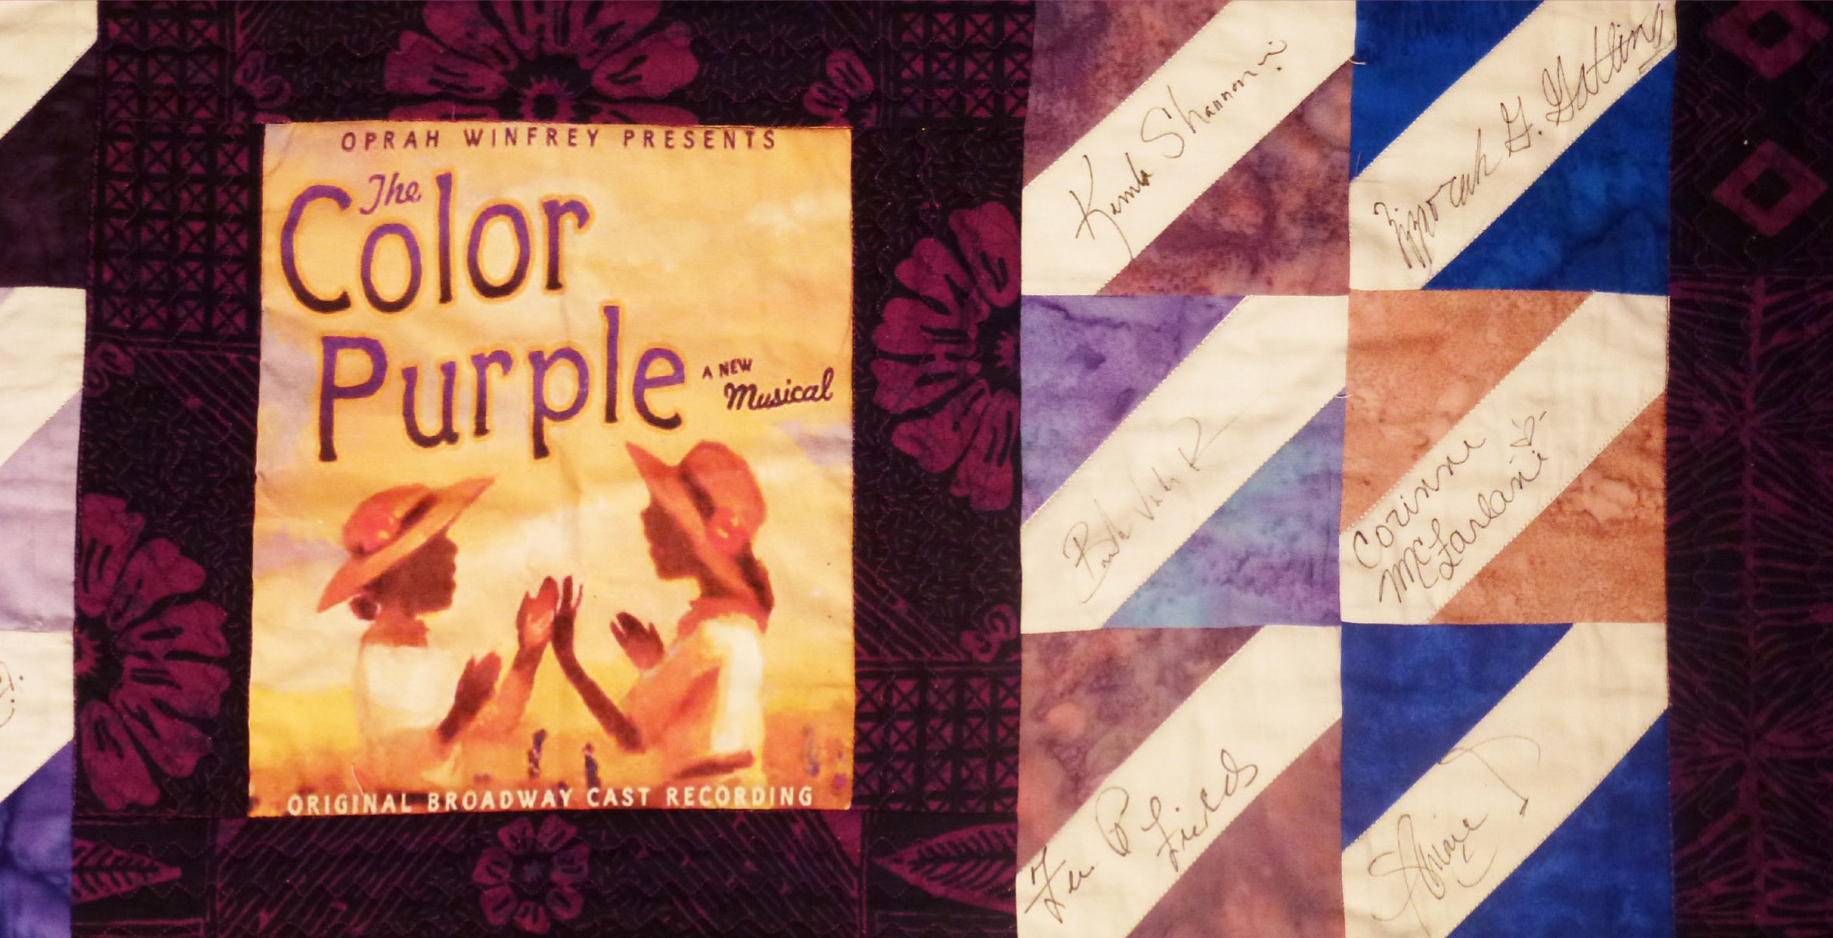 A quilt decorated with the cover of the book, "The Color Purple"